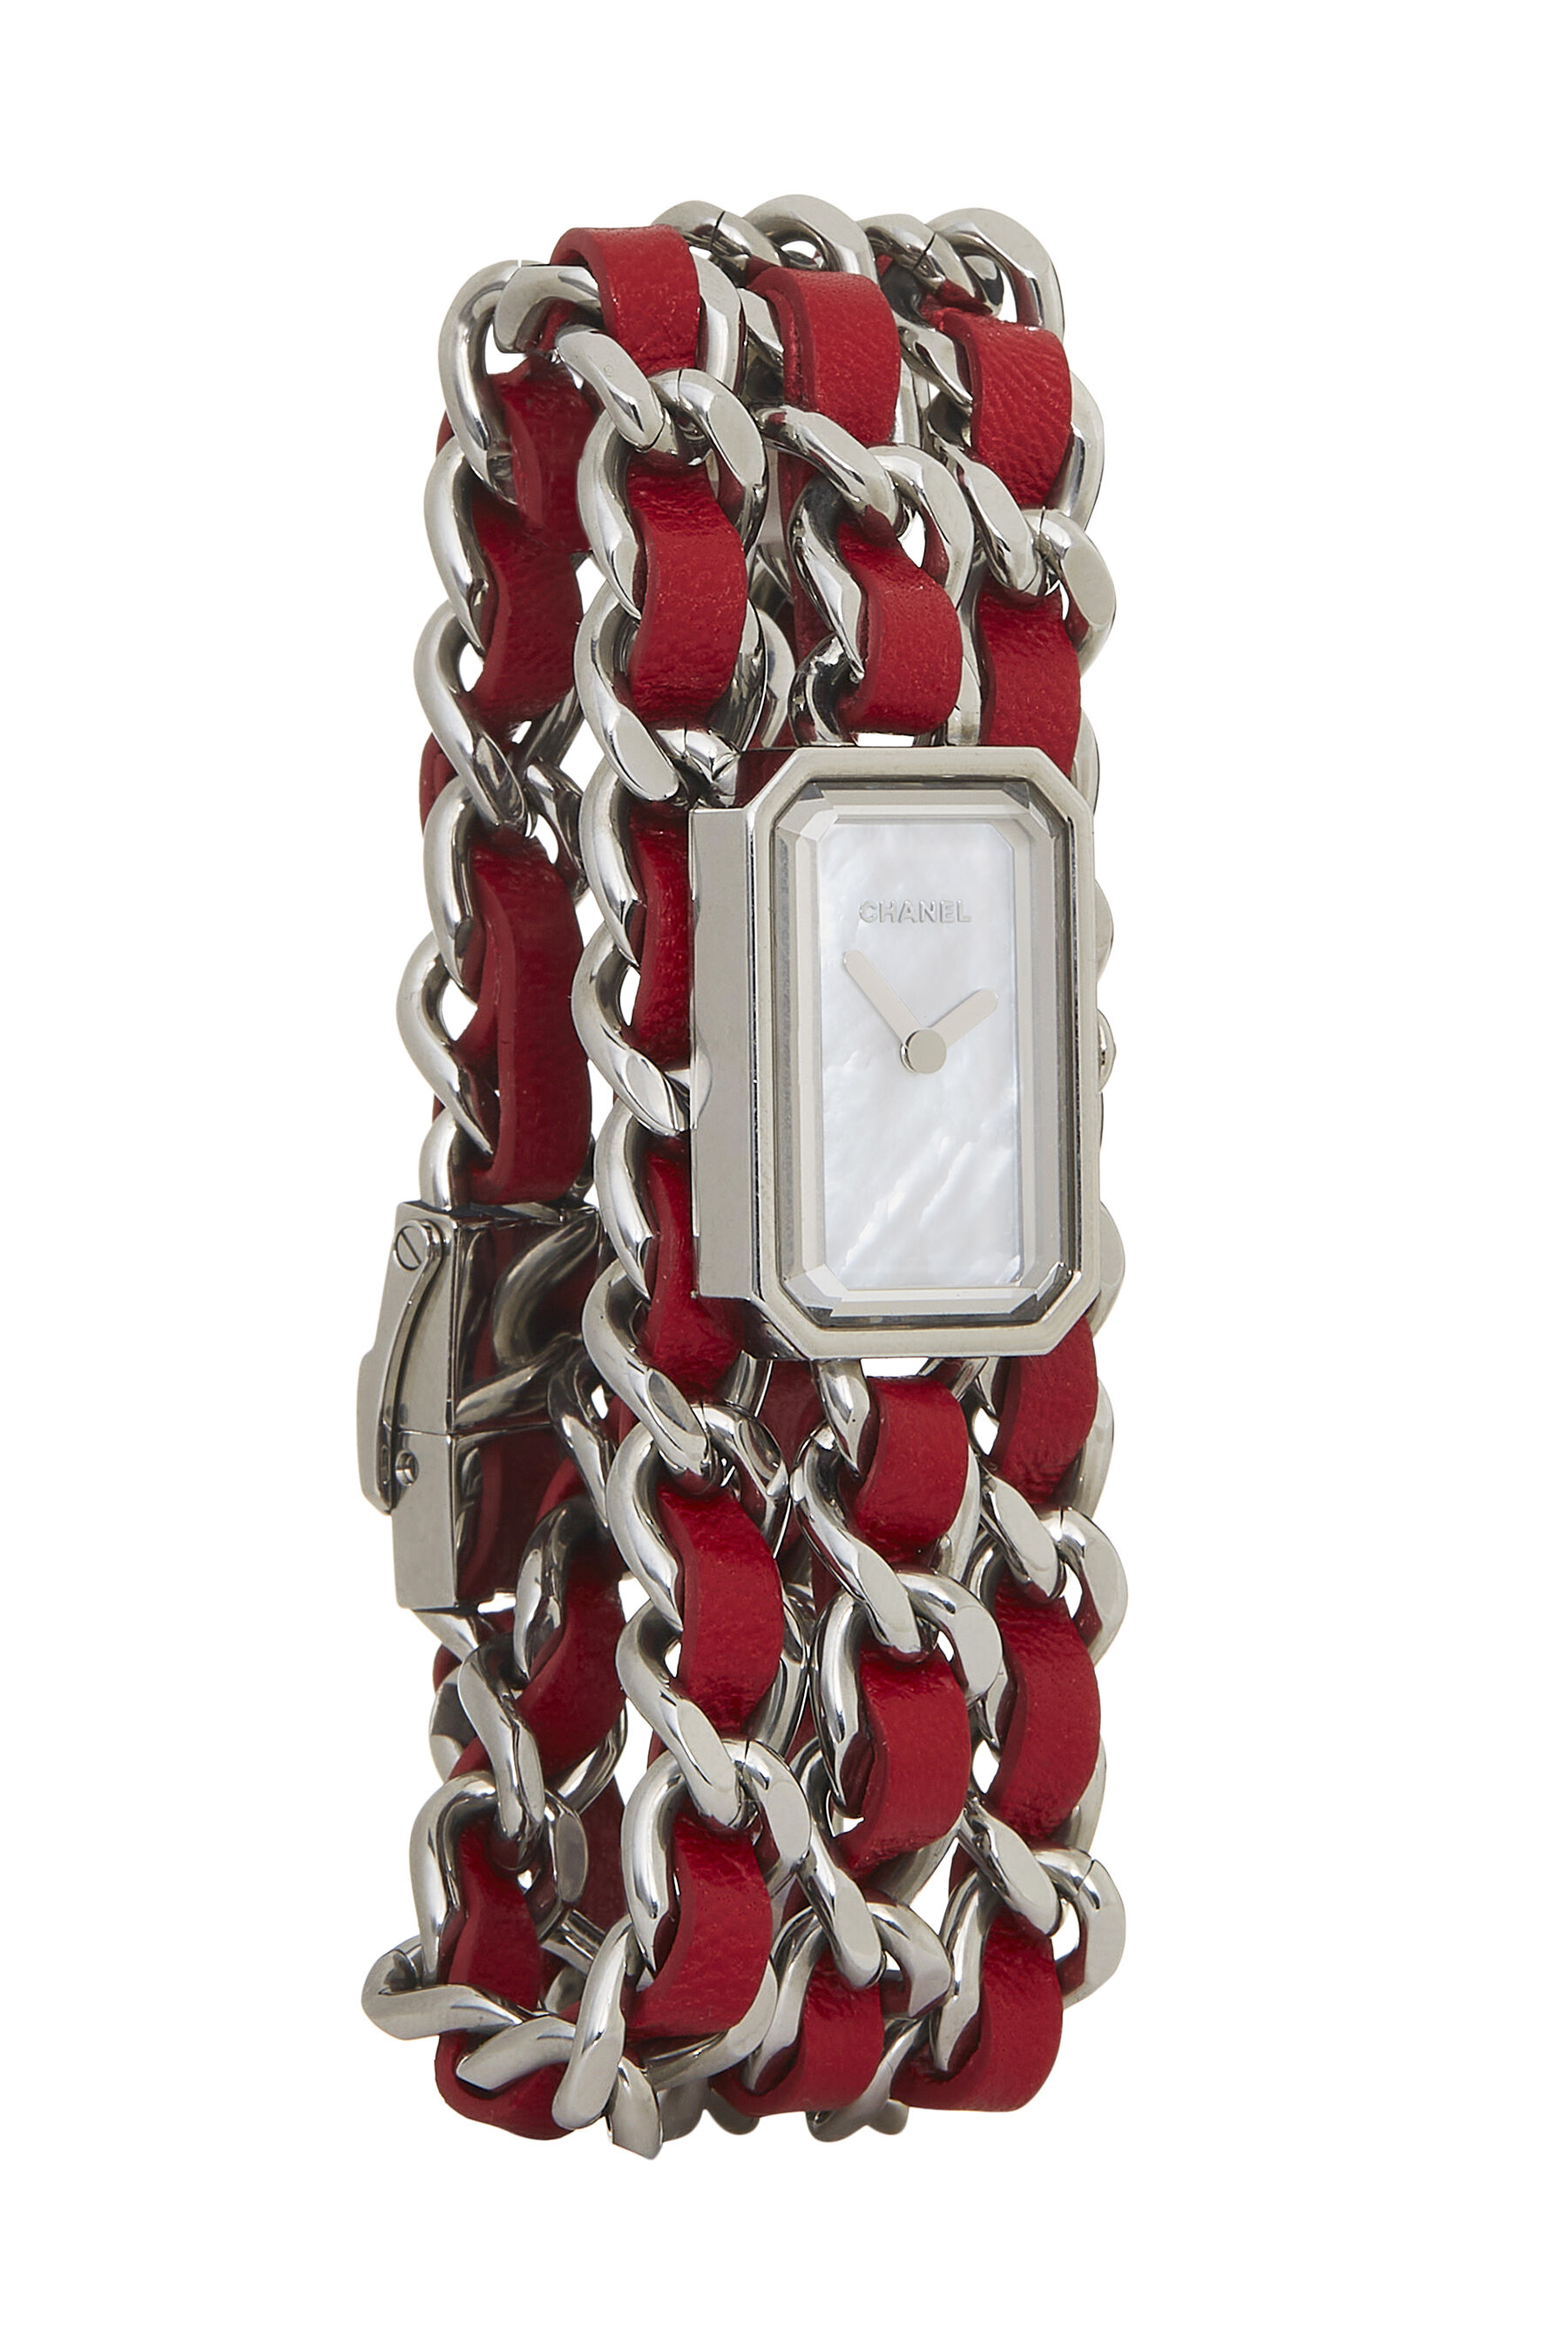 Chanel - Silver & Red Leather Premiere Watch Small